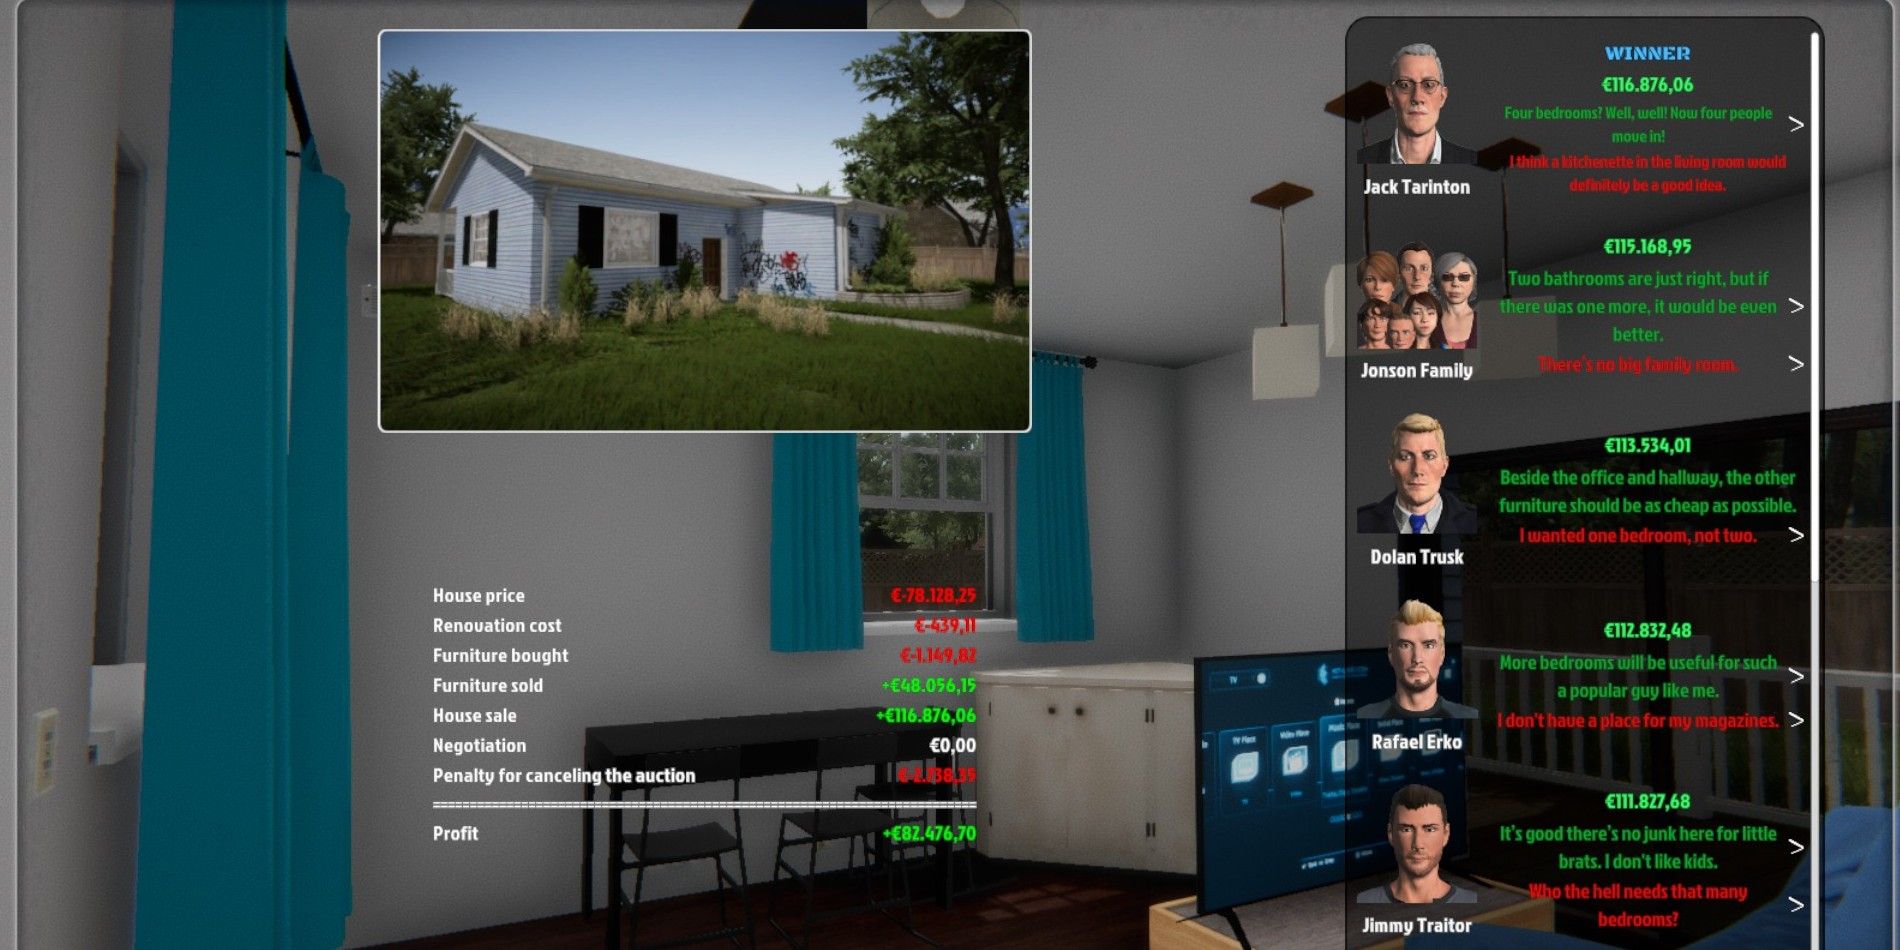 Some House Flipper Buyers Are Impossible To Please Auctions Reflect Their Likes And Dislikes